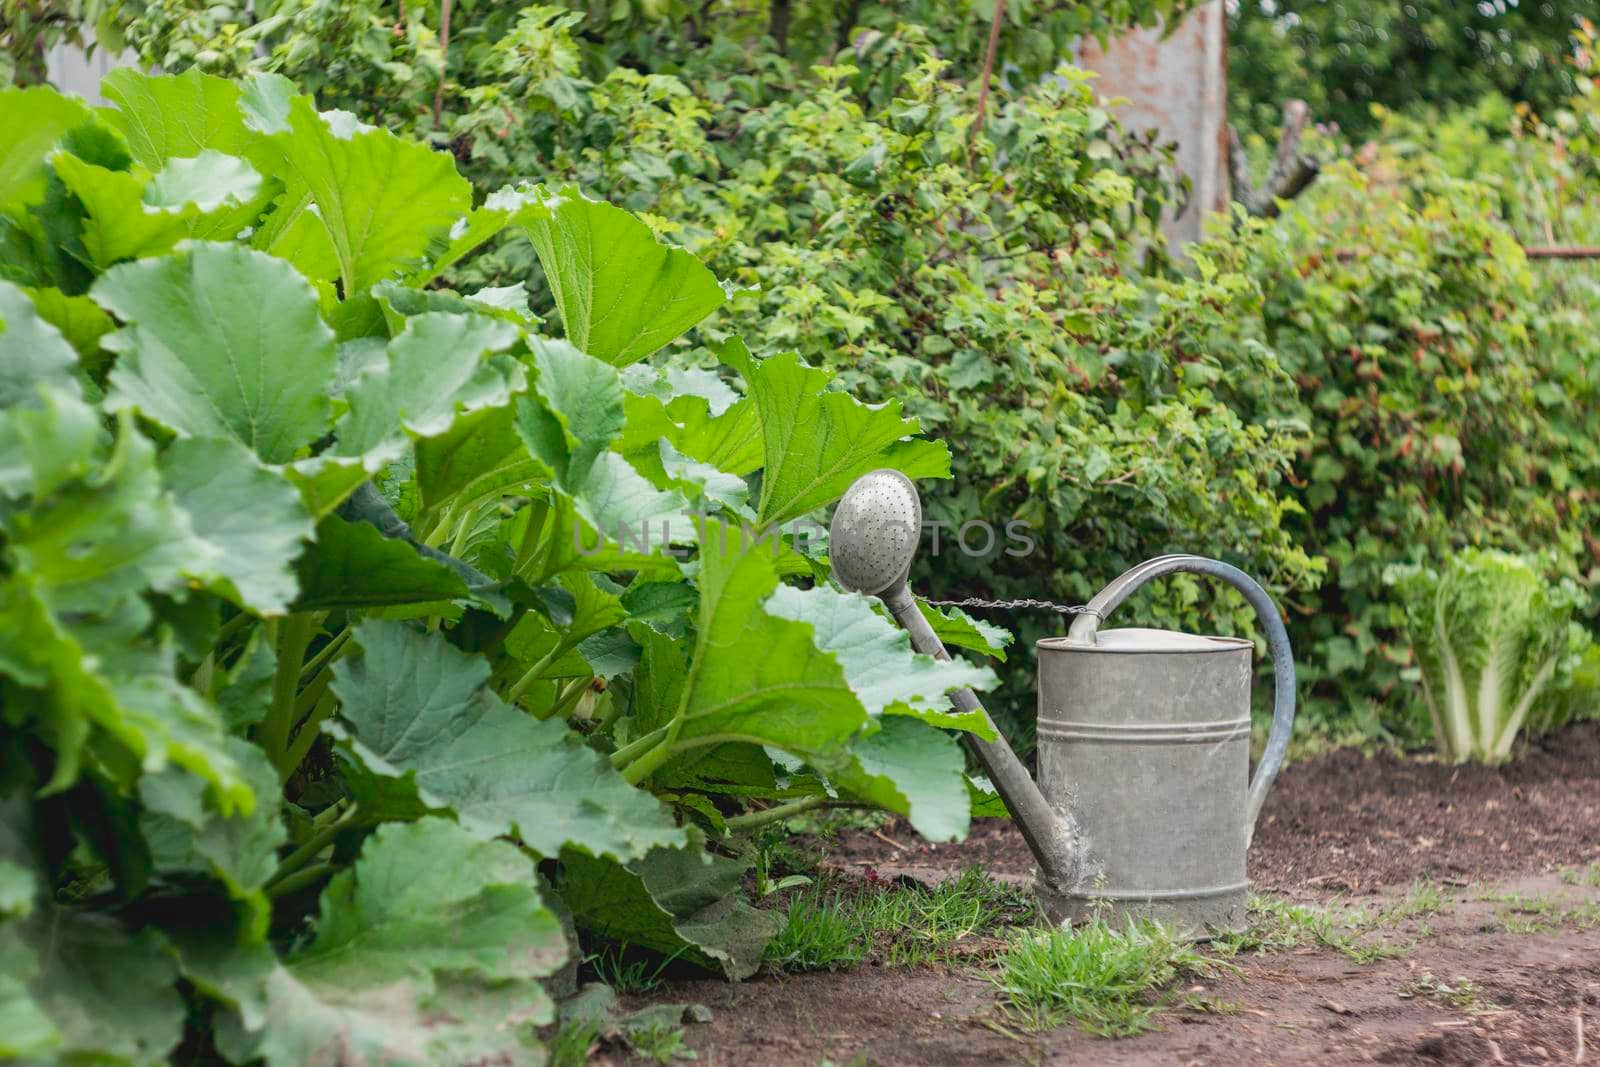 Old metal watering can in garden. Green fresh leaves of edible plants. Gardening at spring and summer. Growing organic food in open ground.